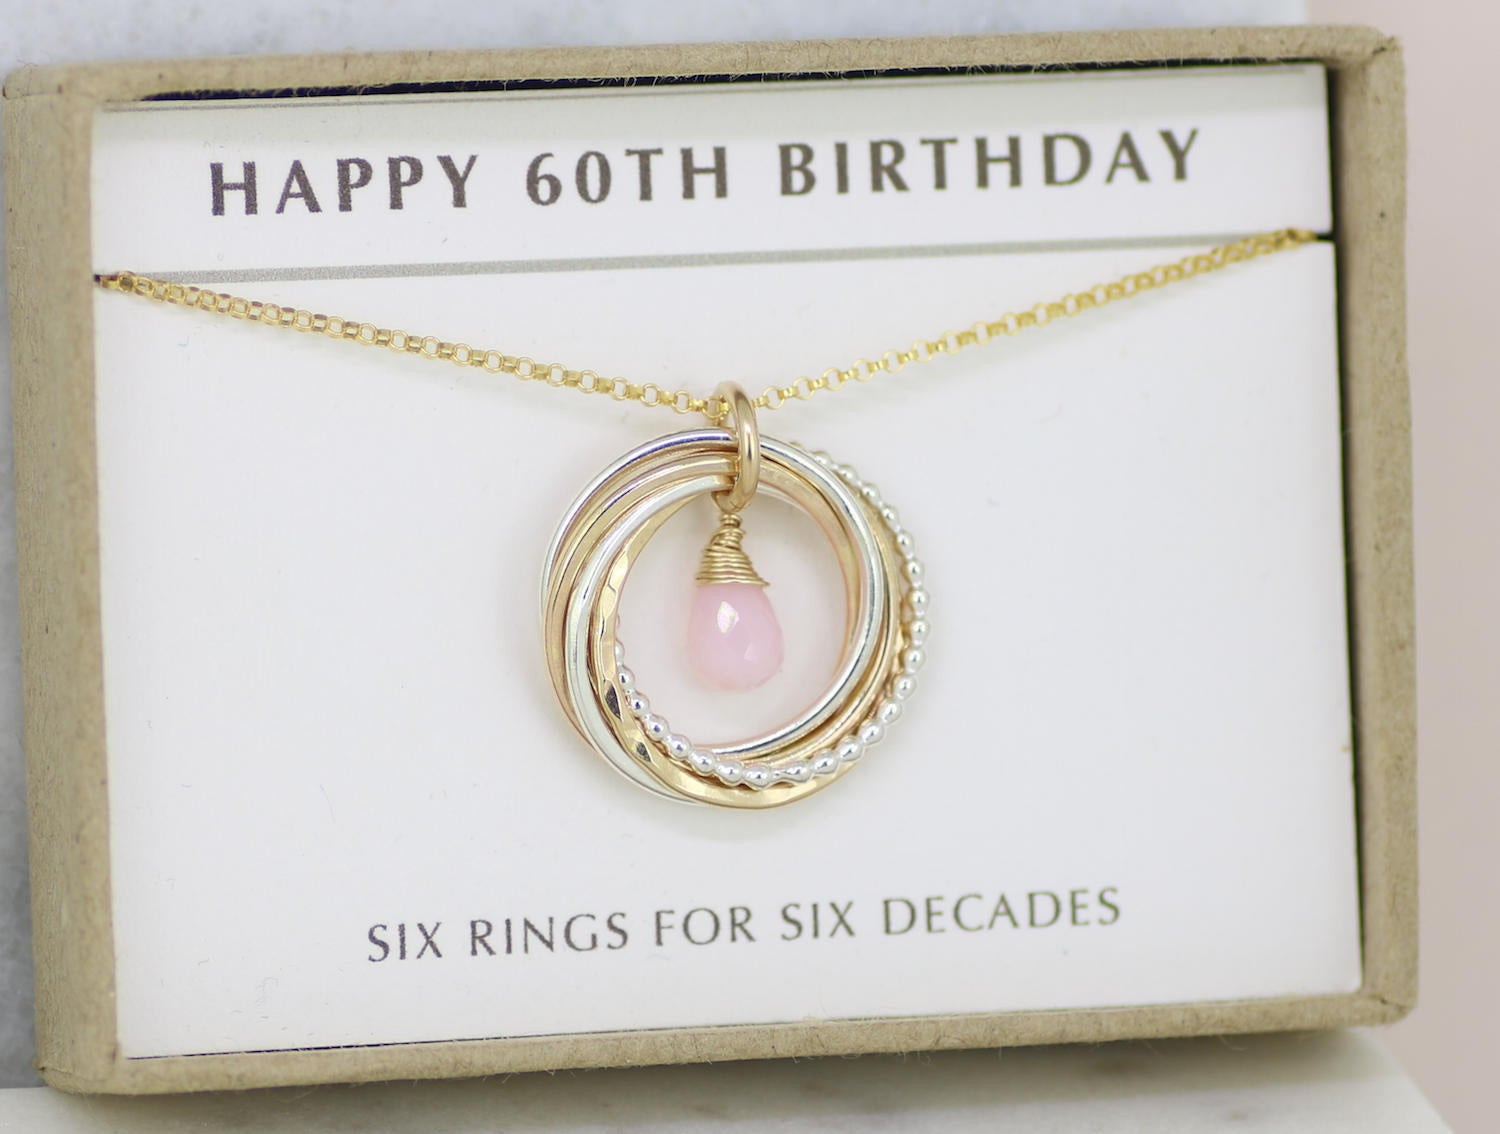 Female Birthday Gifts
 60th birthday ts for women pink opal necklace for October